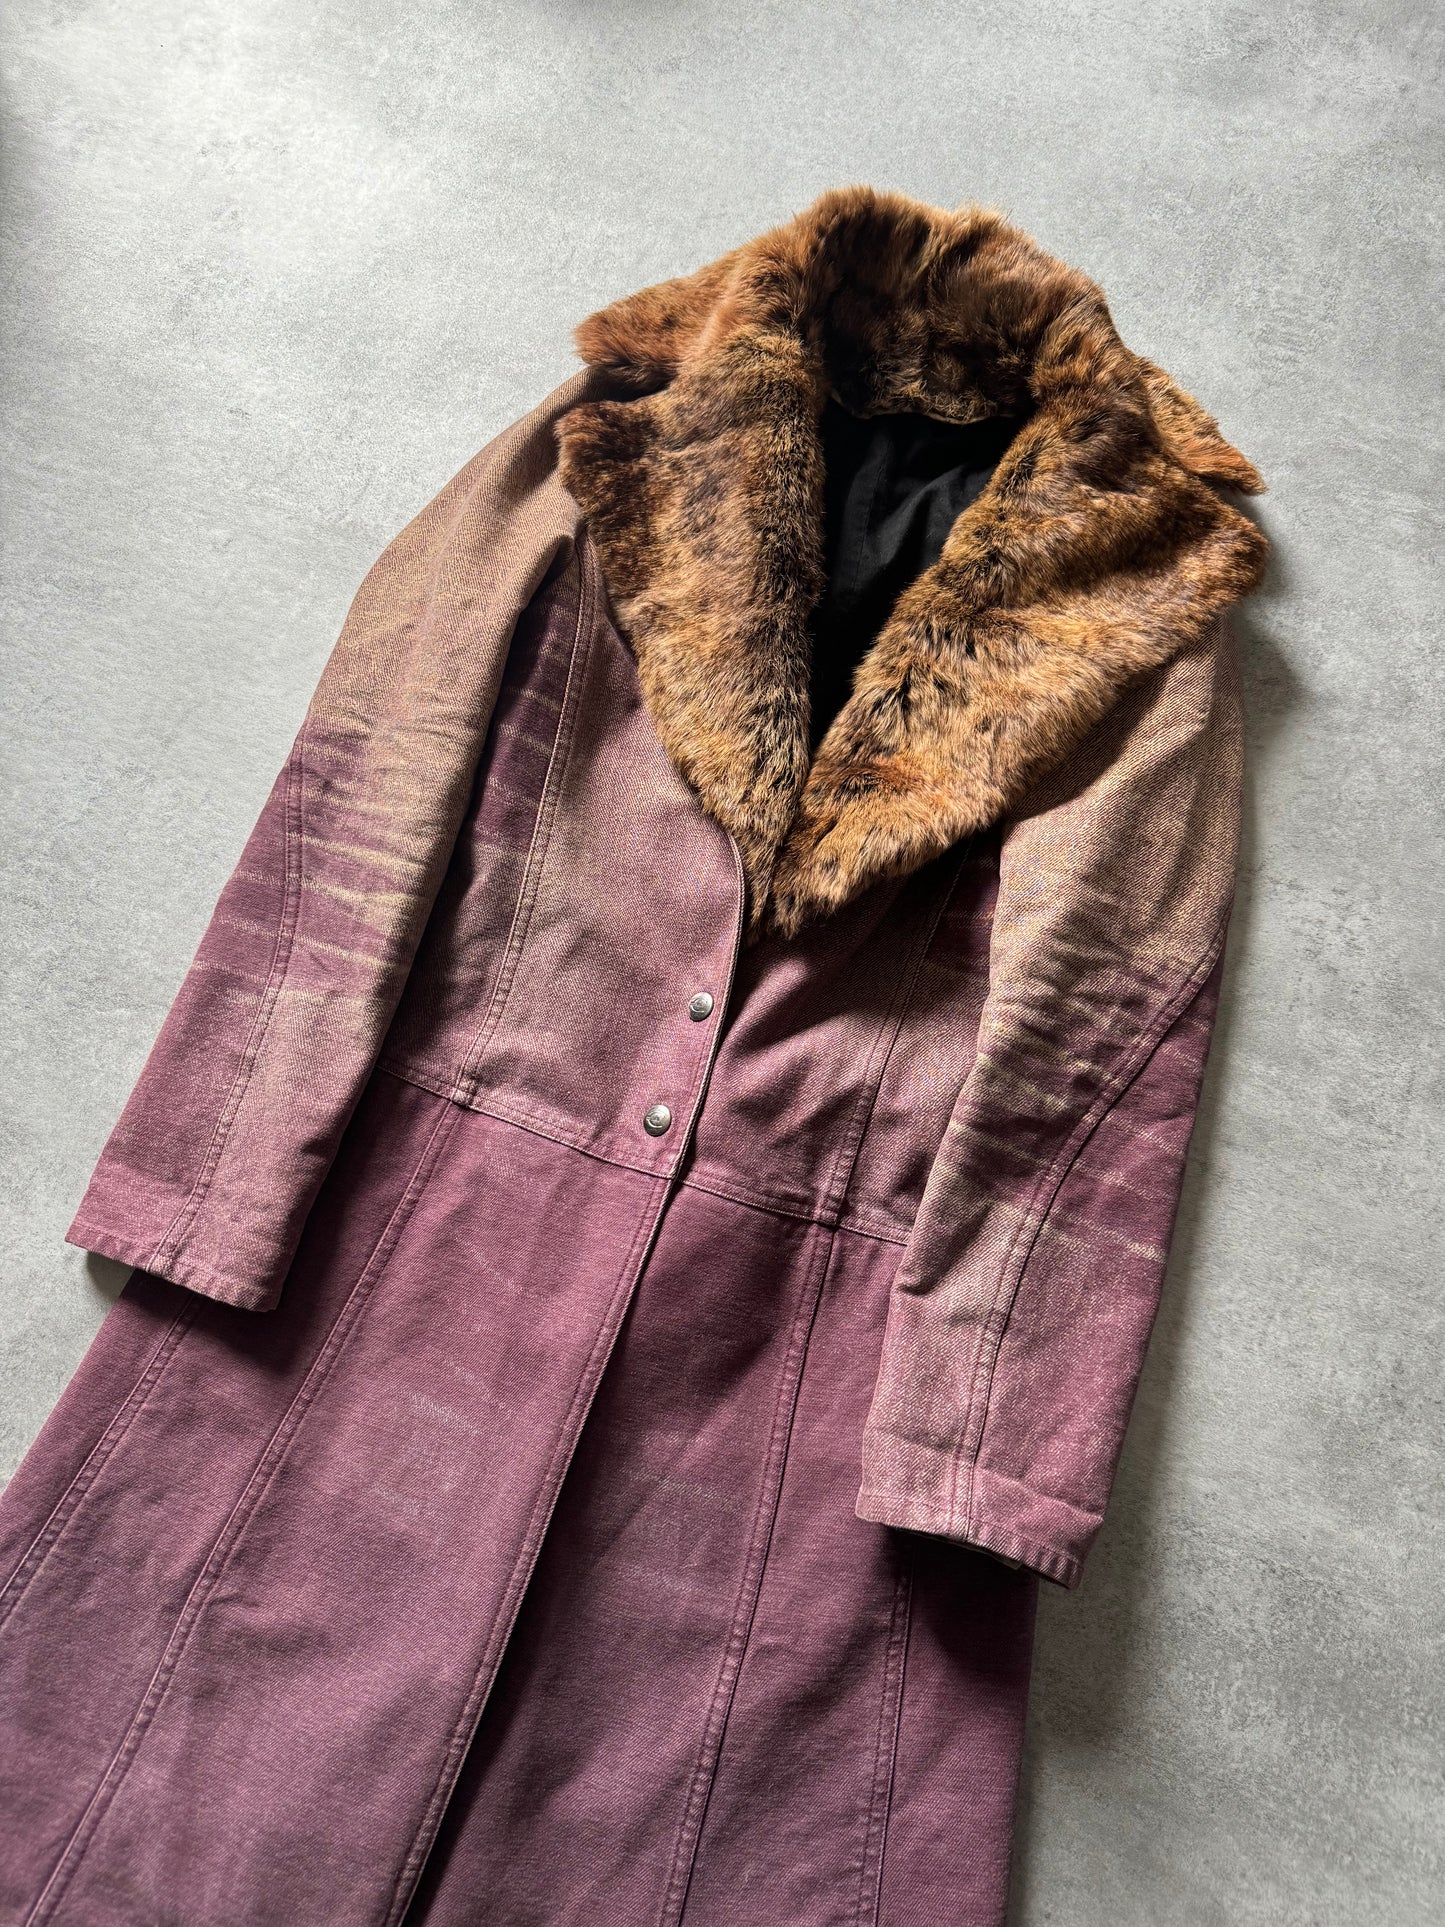 SS2004 Cavalli Sunset Faded Purple Trench Coat (S) - 6